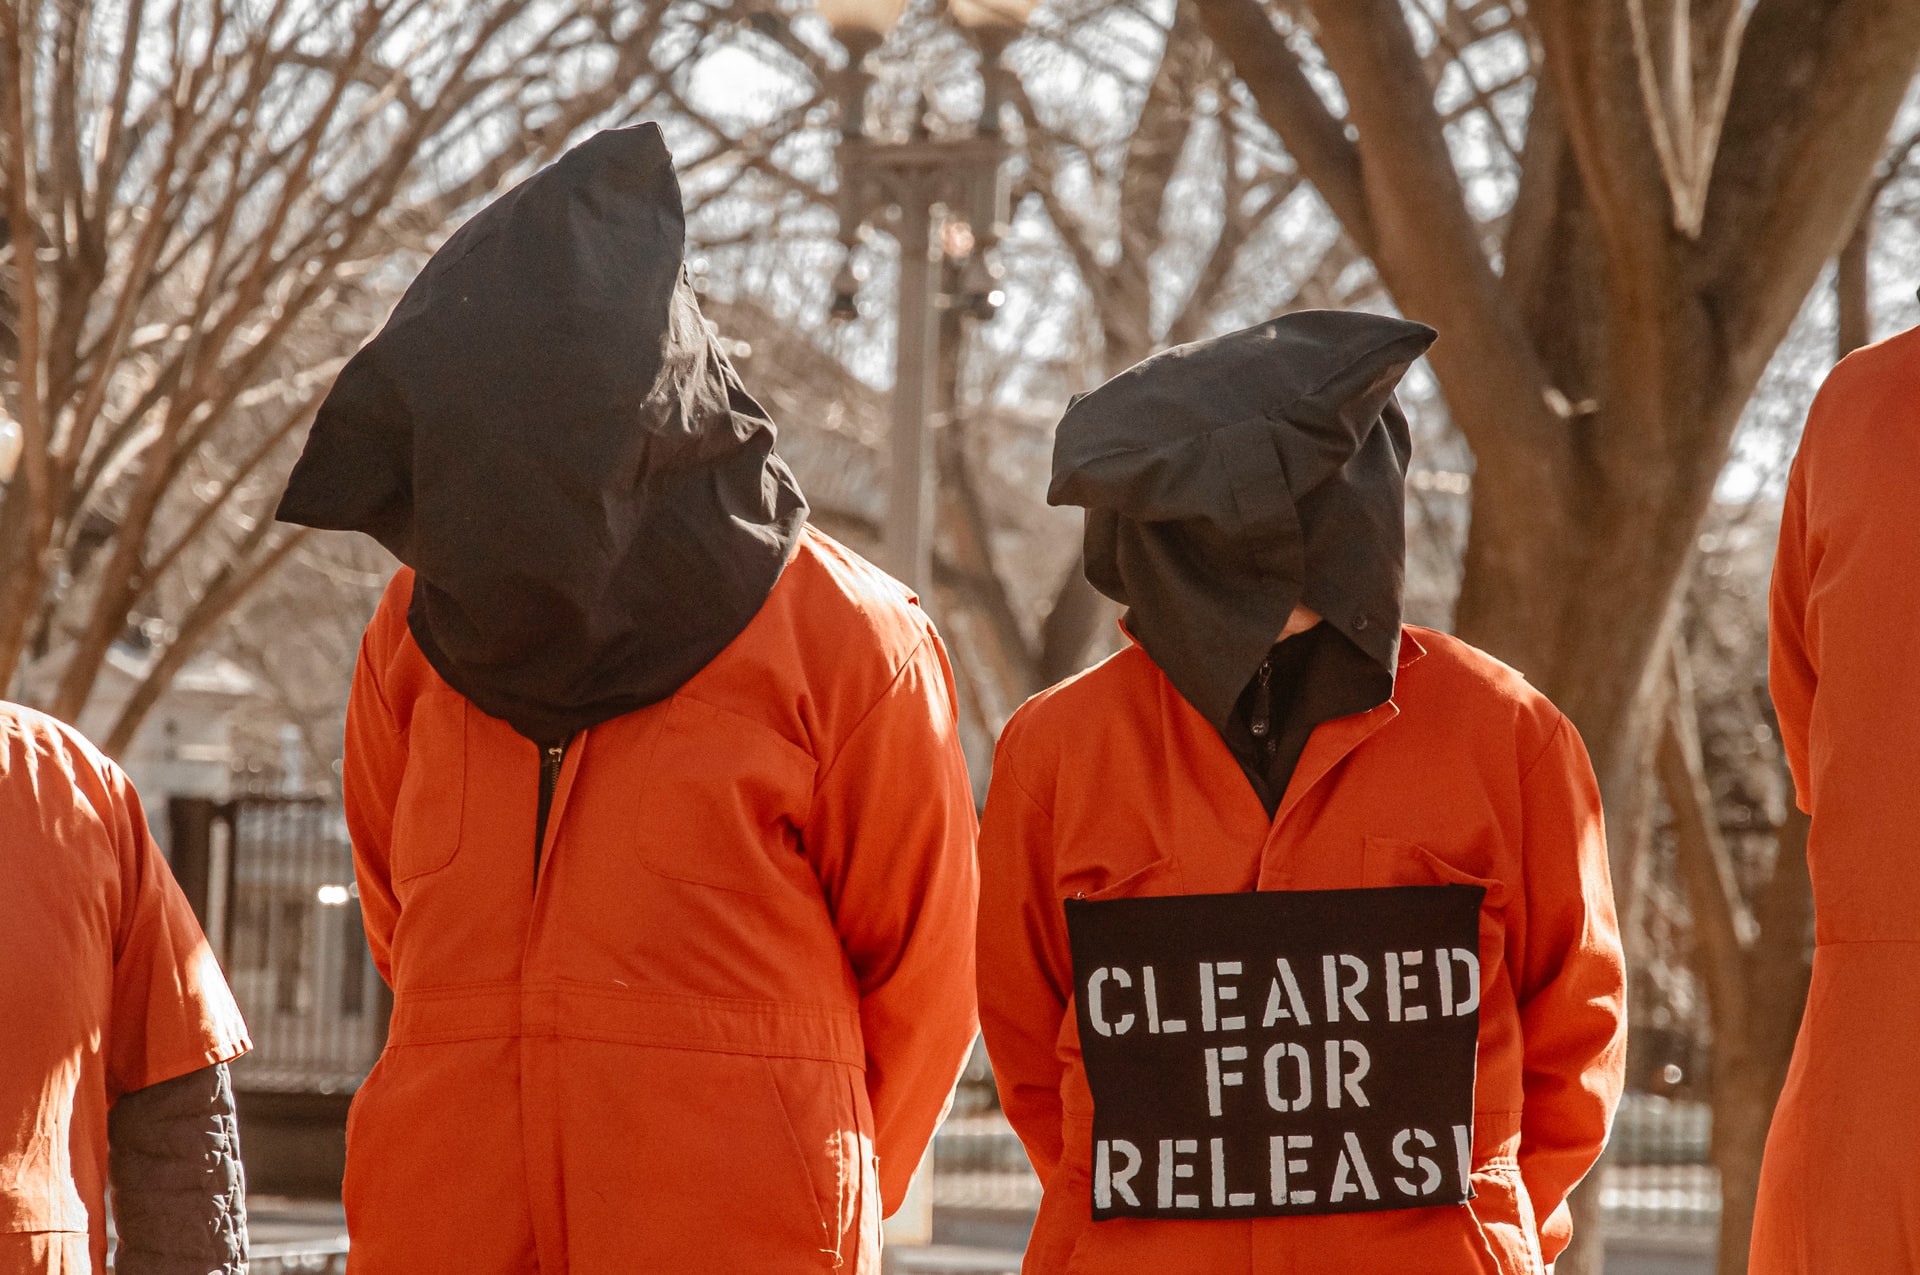 Guantánamo Bay: “Hunt down and punish those (not) responsible”